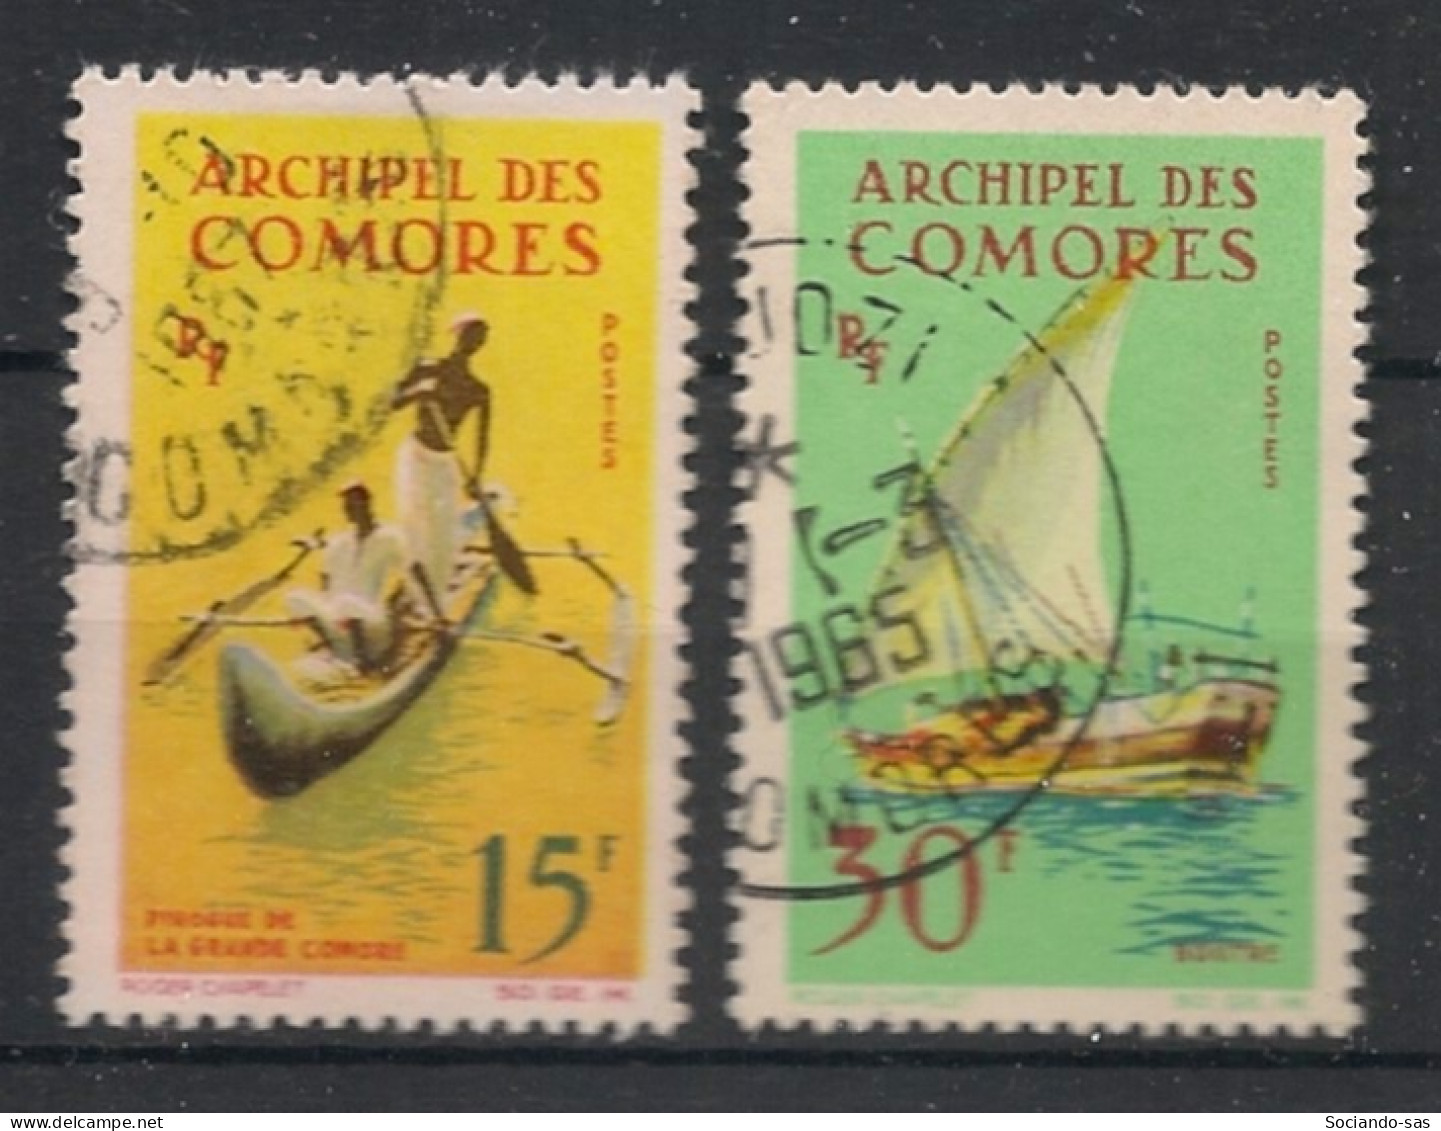 COMORES - 1964 - N°YT. 33 à 34 - Embarcations - Oblitéré / Used - Used Stamps